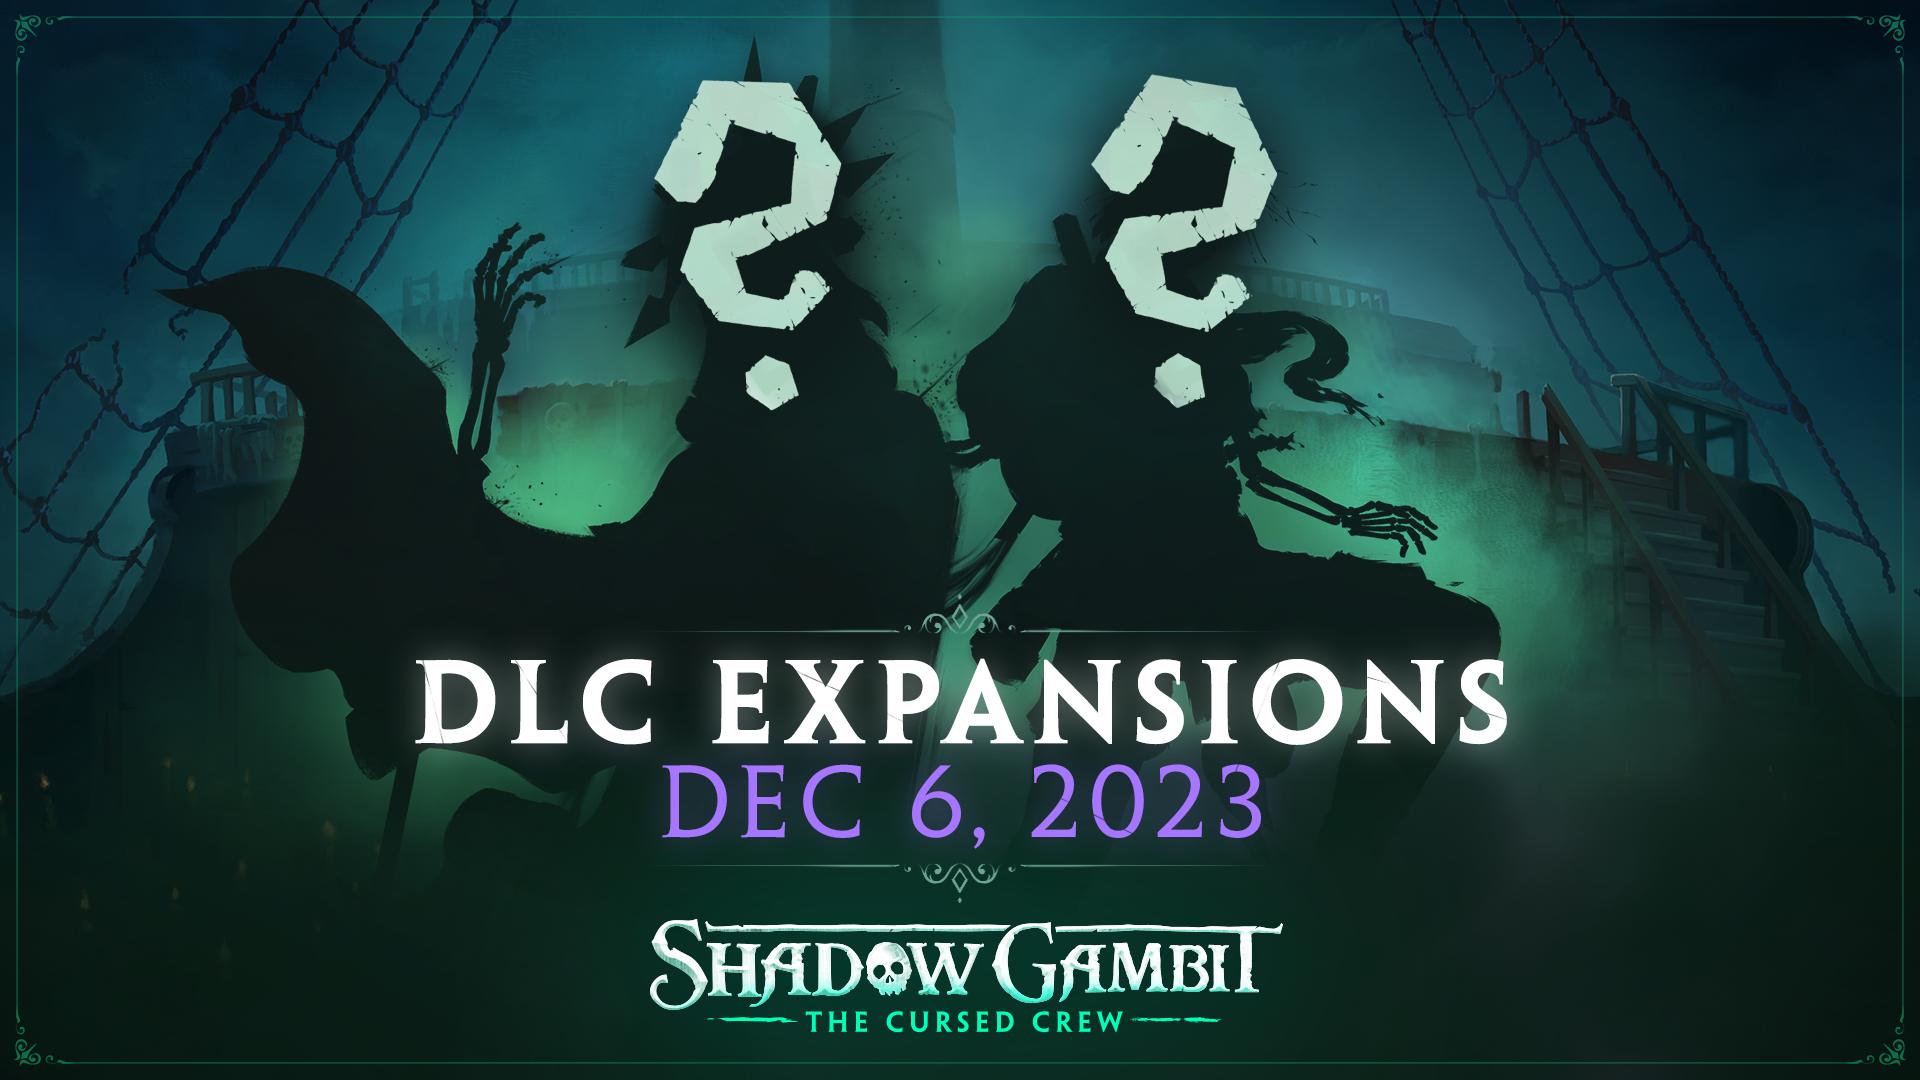 Shadow Gambit: The Cursed Crew DLC announcement image